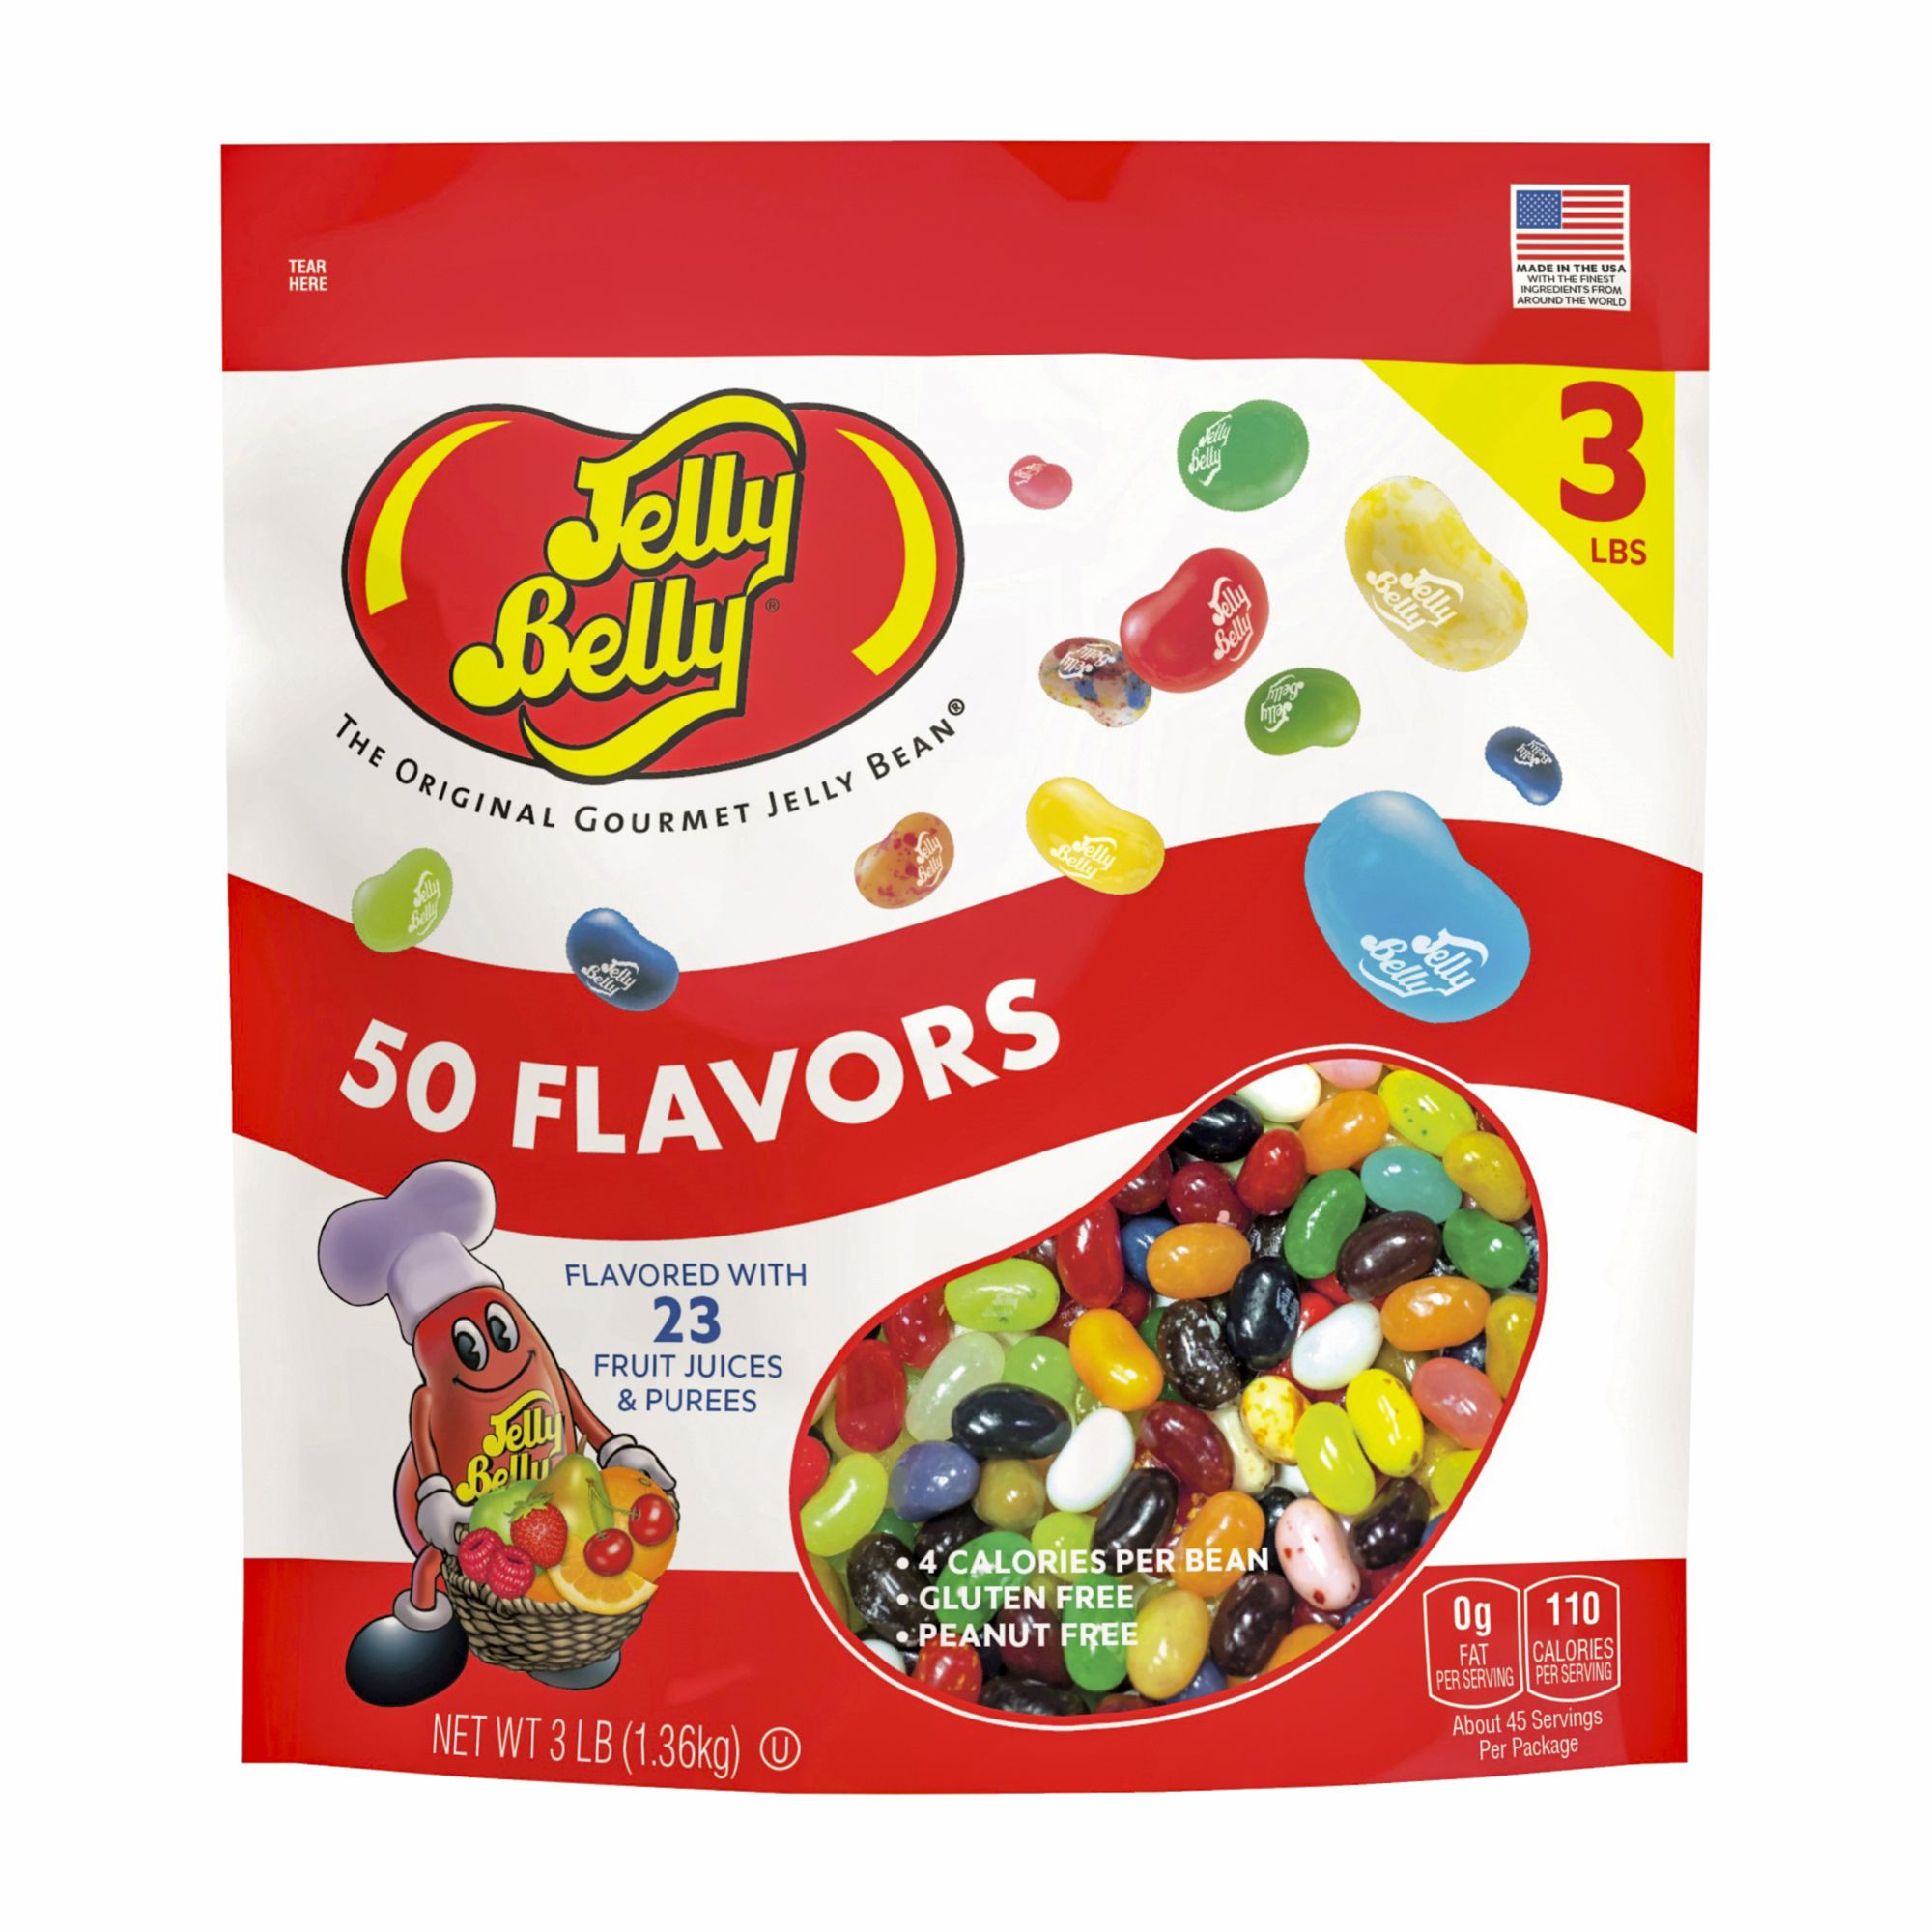 Brach's Classic Jelly Beans, Back to School Candy, Assorted Flavors, 54  Ounce Bulk Candy Bags (Pack of 2) 